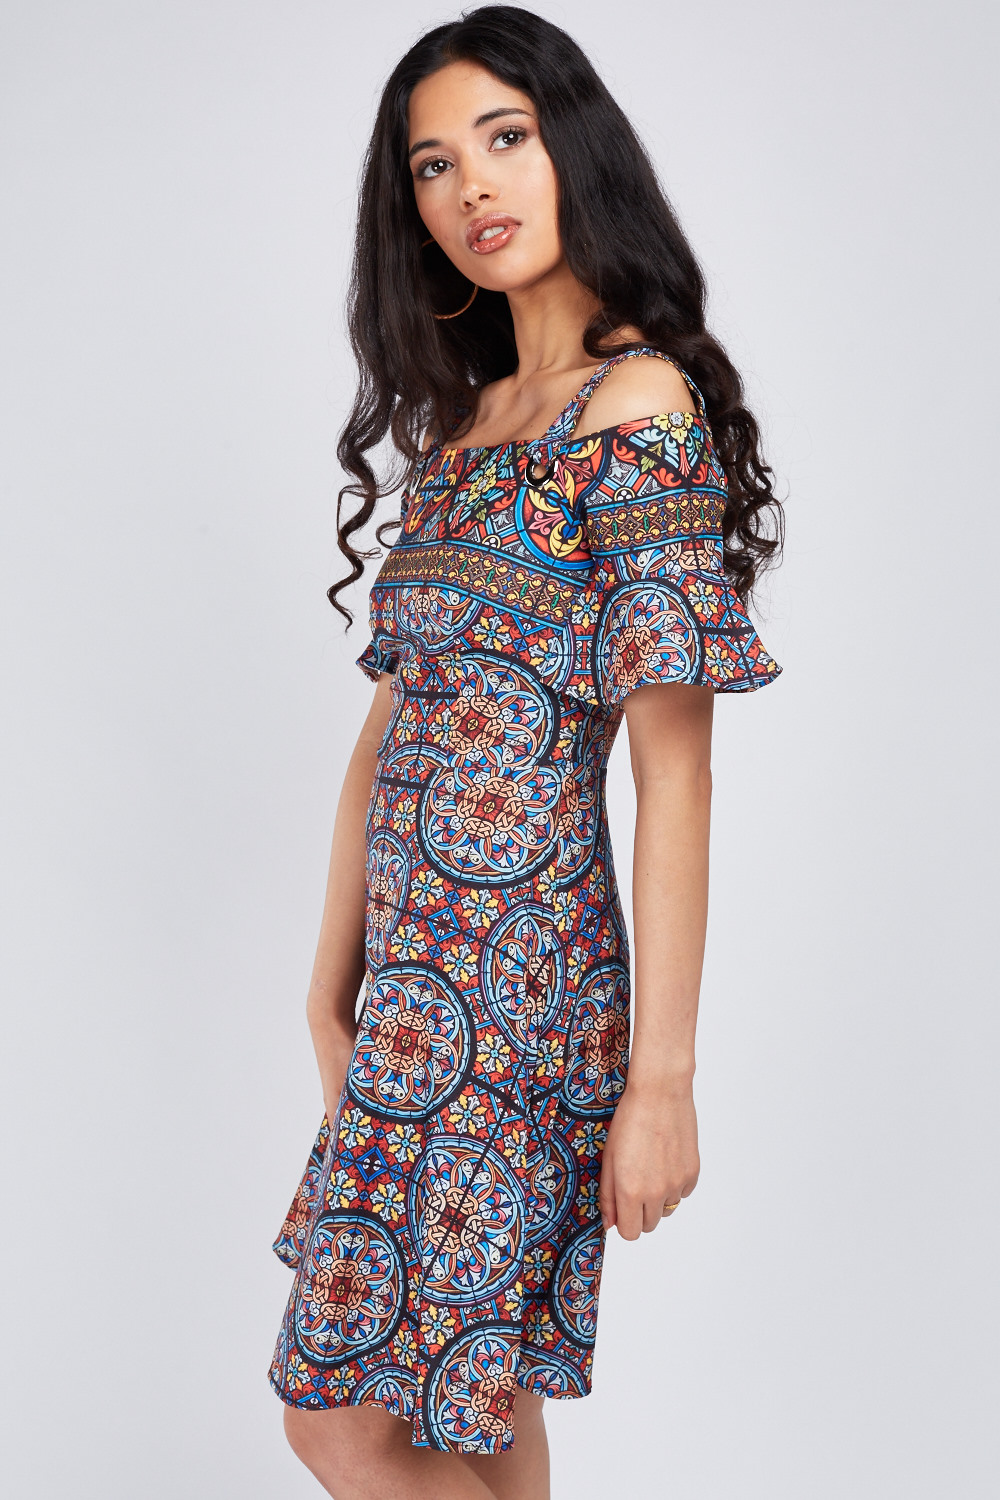 Church Stained Glass Print Dress - Just $3